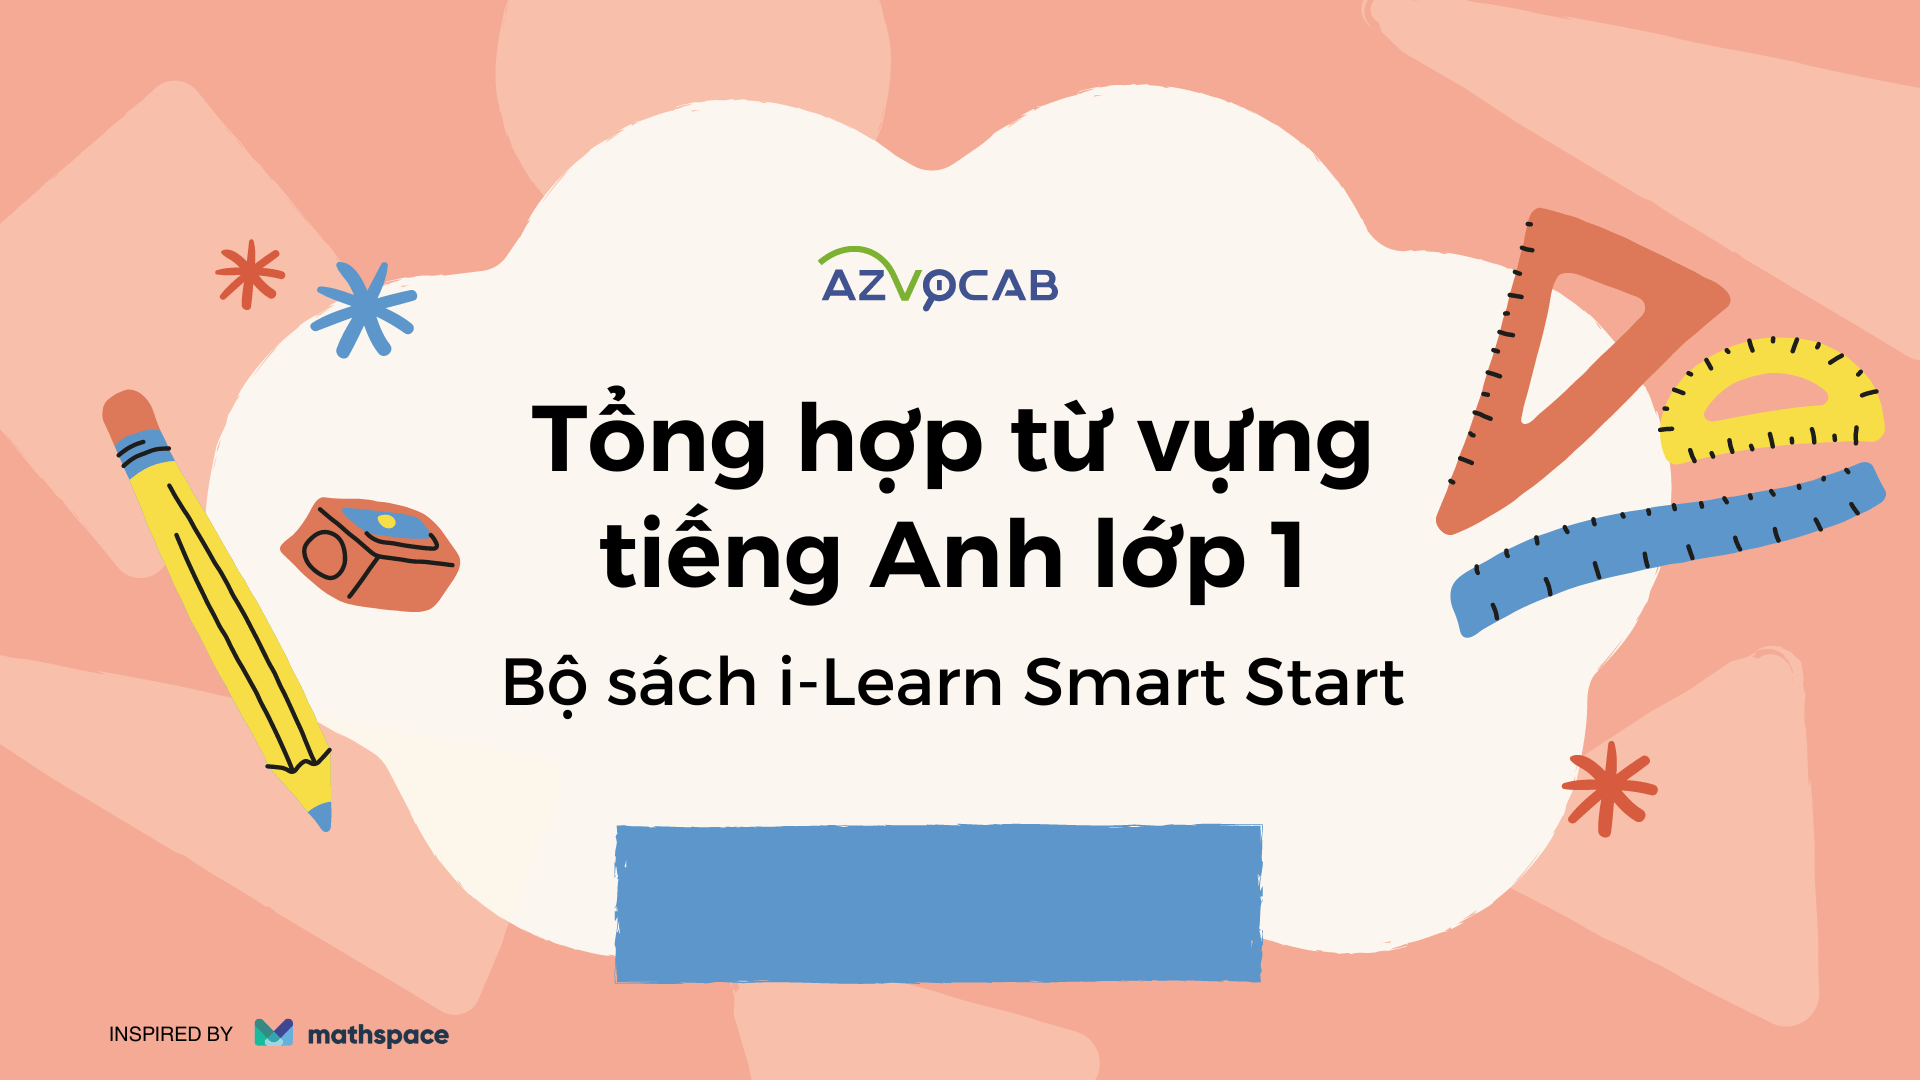 Tiếng Anh lớp 1 i-Learn Smart Start